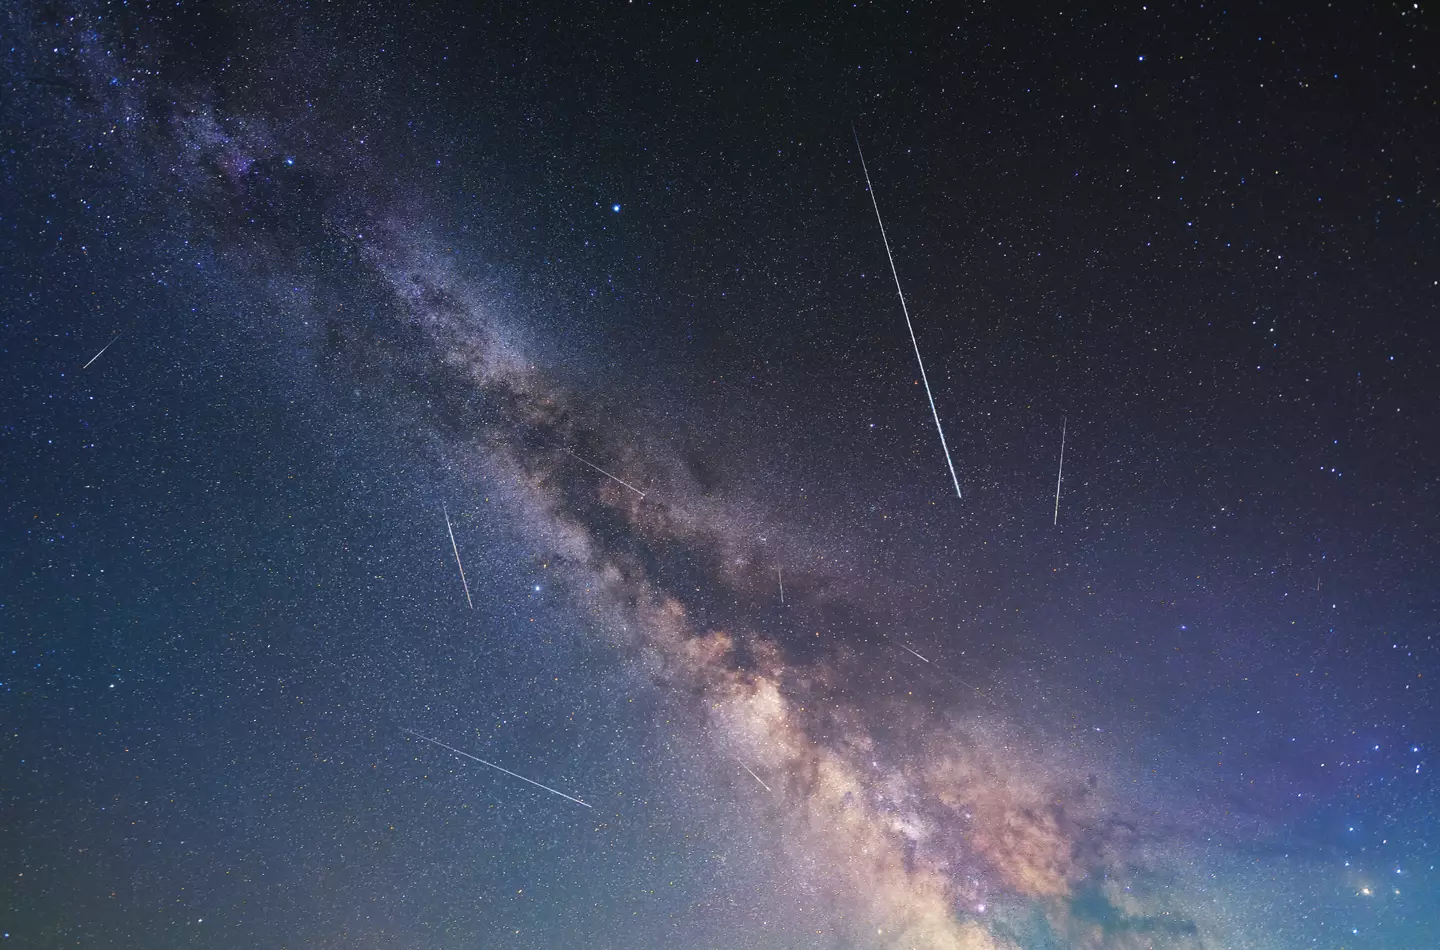 Tonight is your best chance to get a glimpse of the meteor shower.